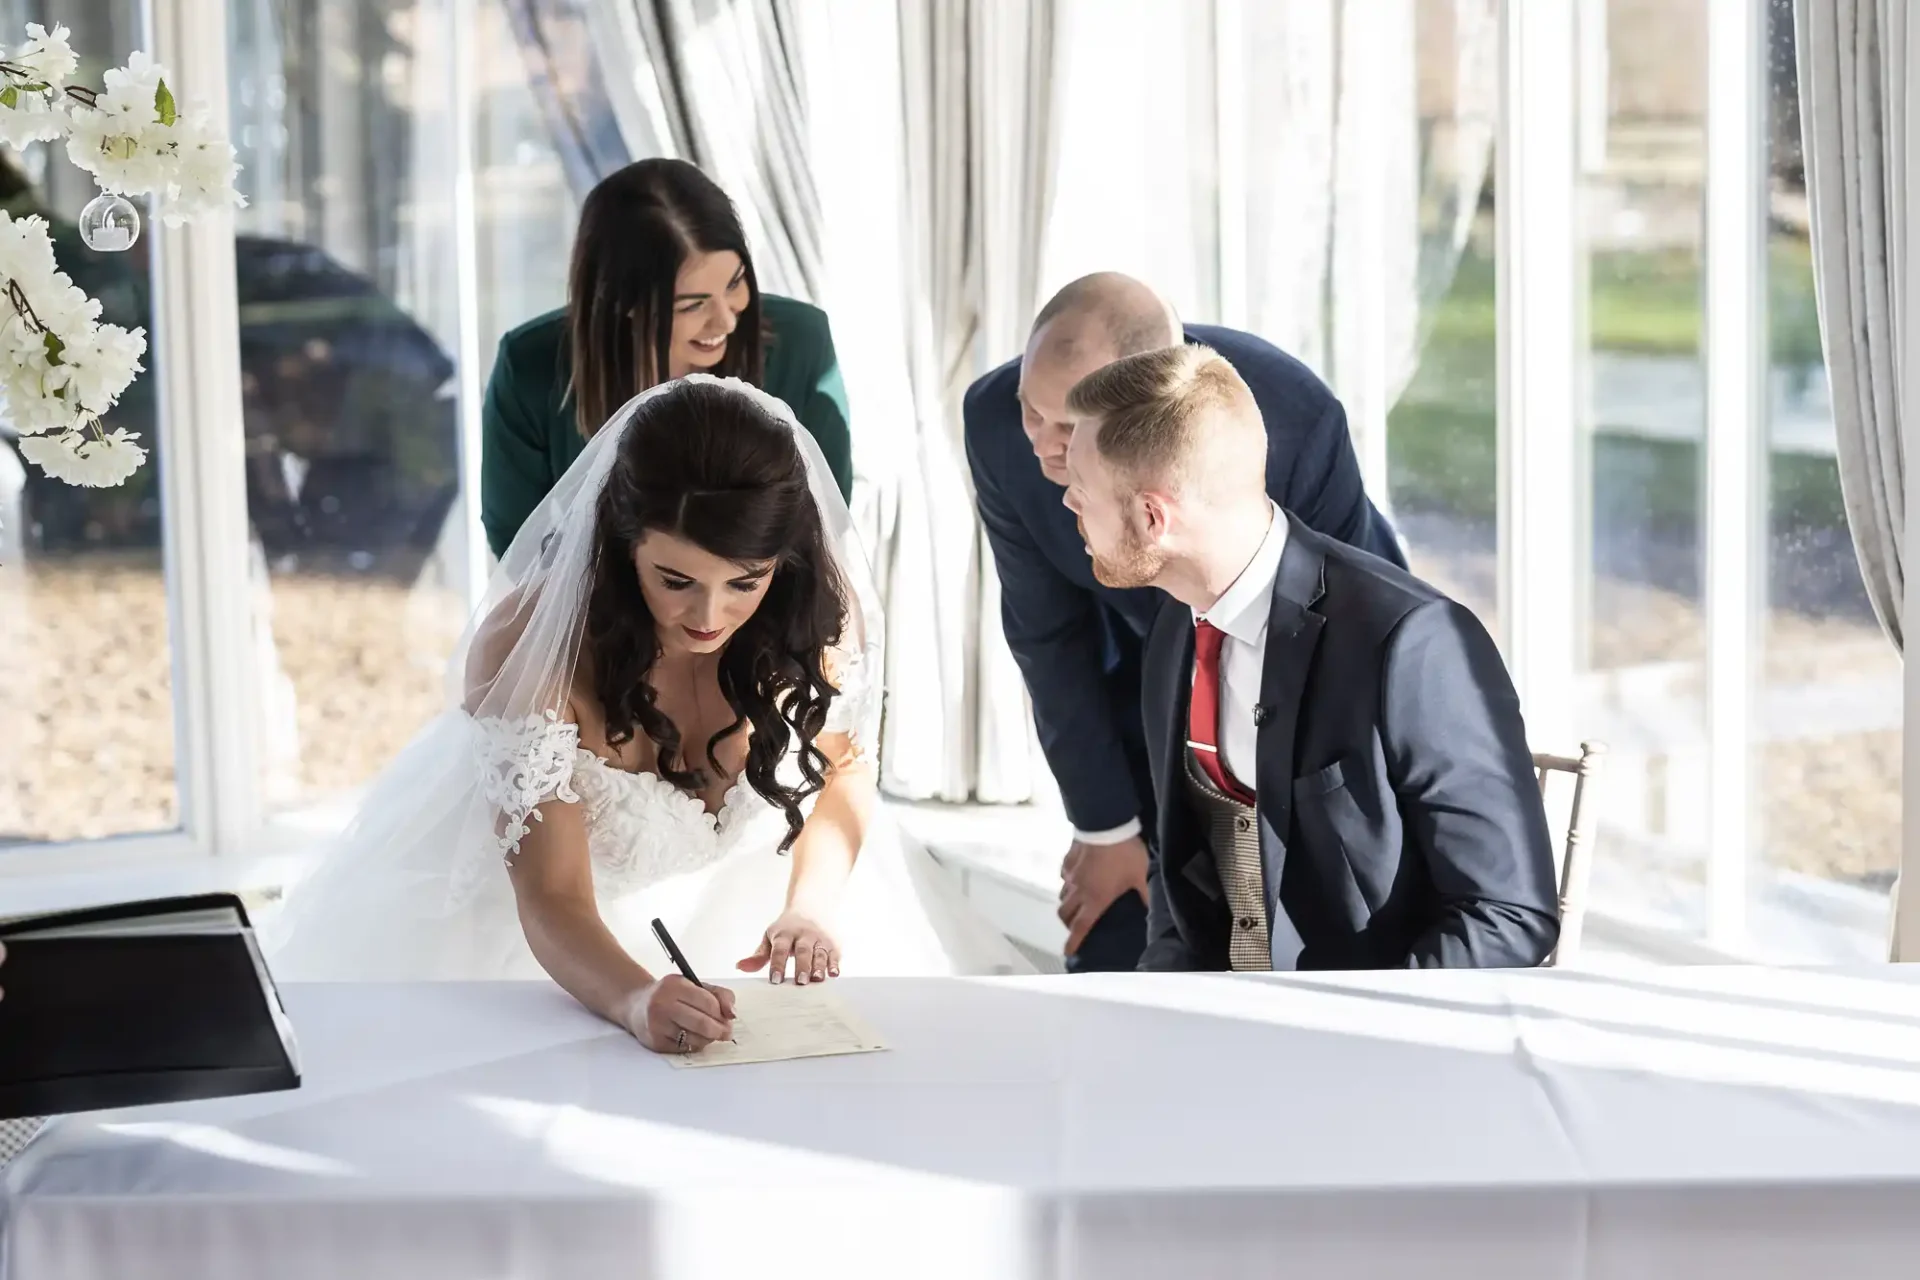 A bride in a white gown and a groom in a red tie and black suit watch as she signs a document at a table, with two witnesses standing behind them.